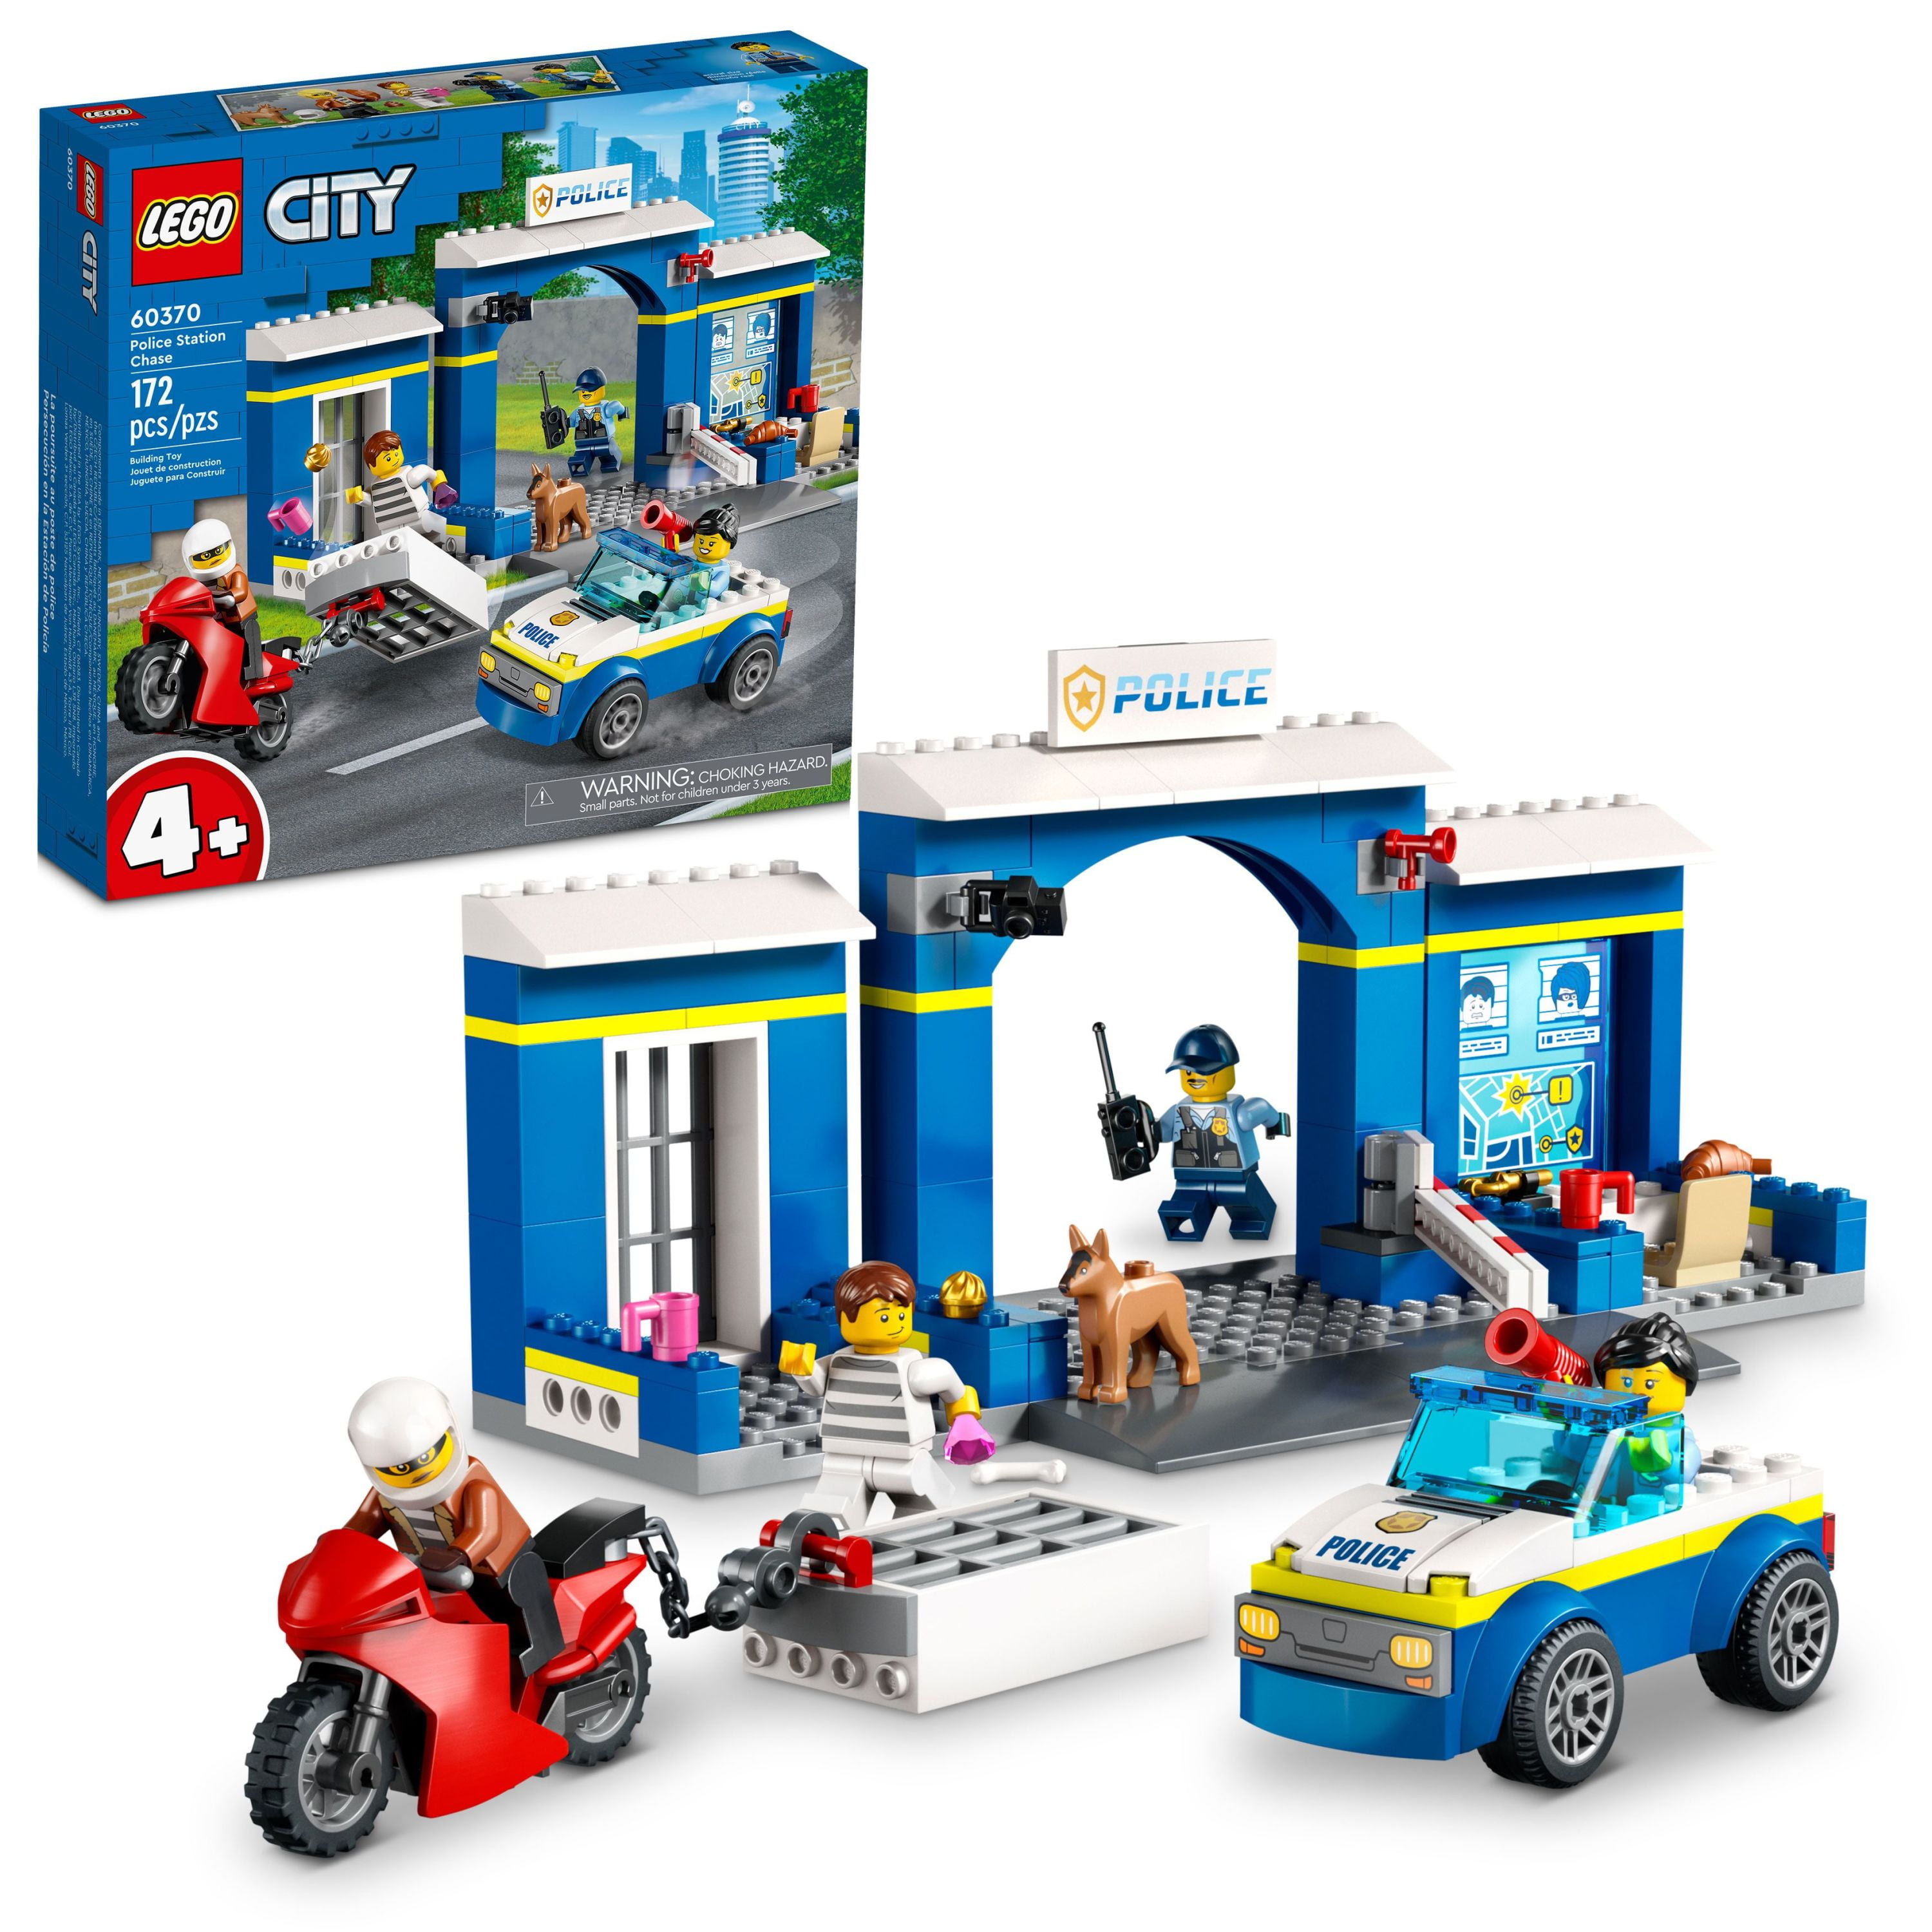 LEGO Police Chase with Police Car Toy 60370 Walmart.com